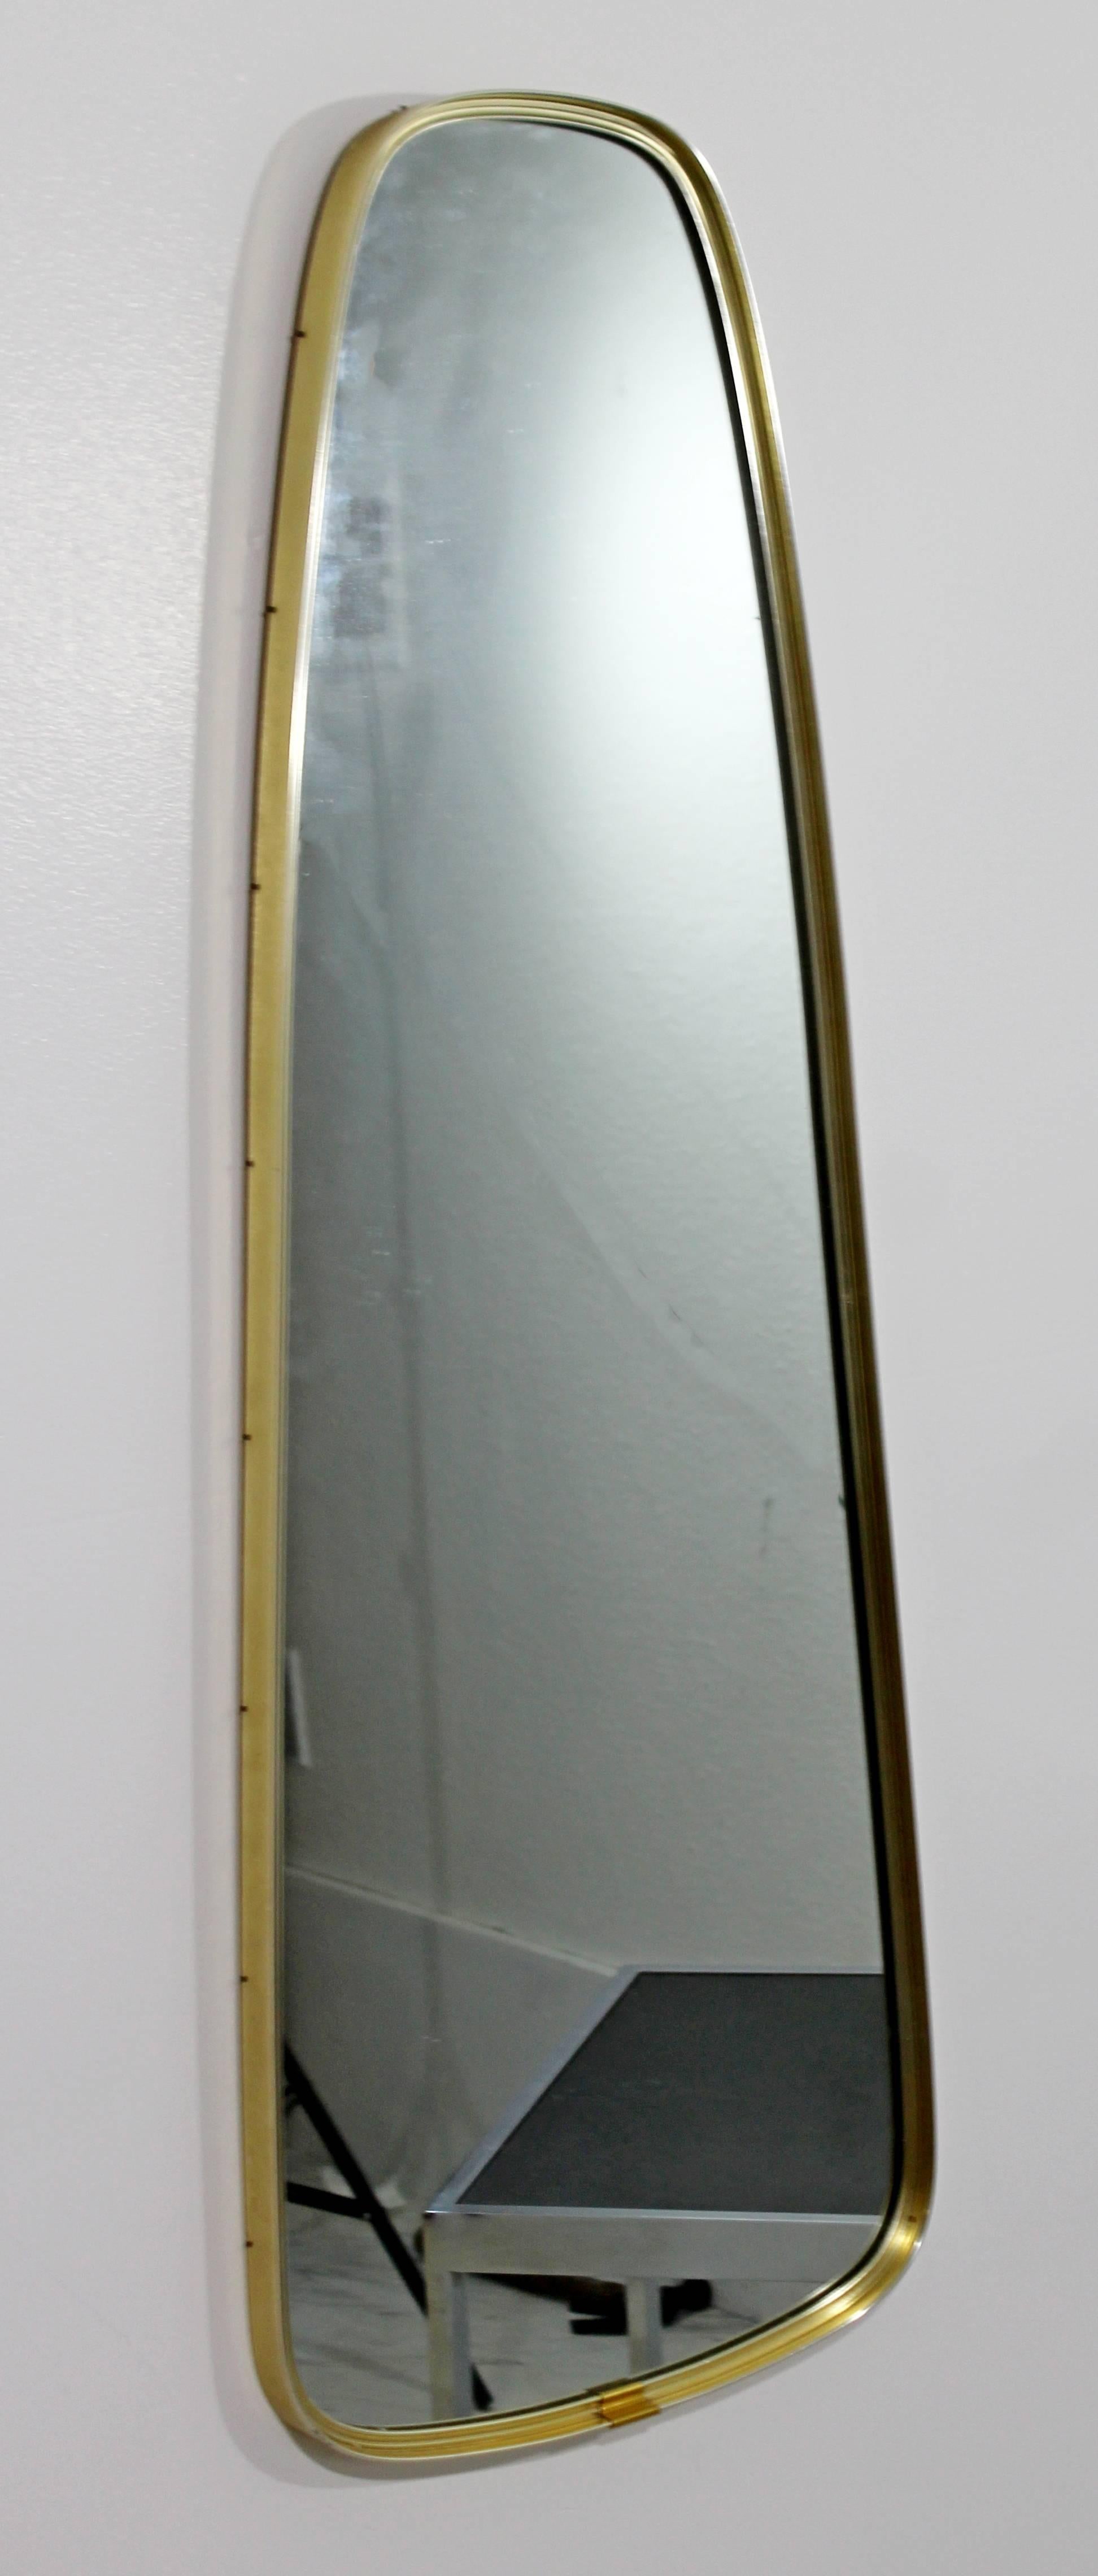 For your consideration is a gorgeous, oval, hanging mirror by La Barge, circa the 1960s. In excellent condition. The dimensions are 14.5